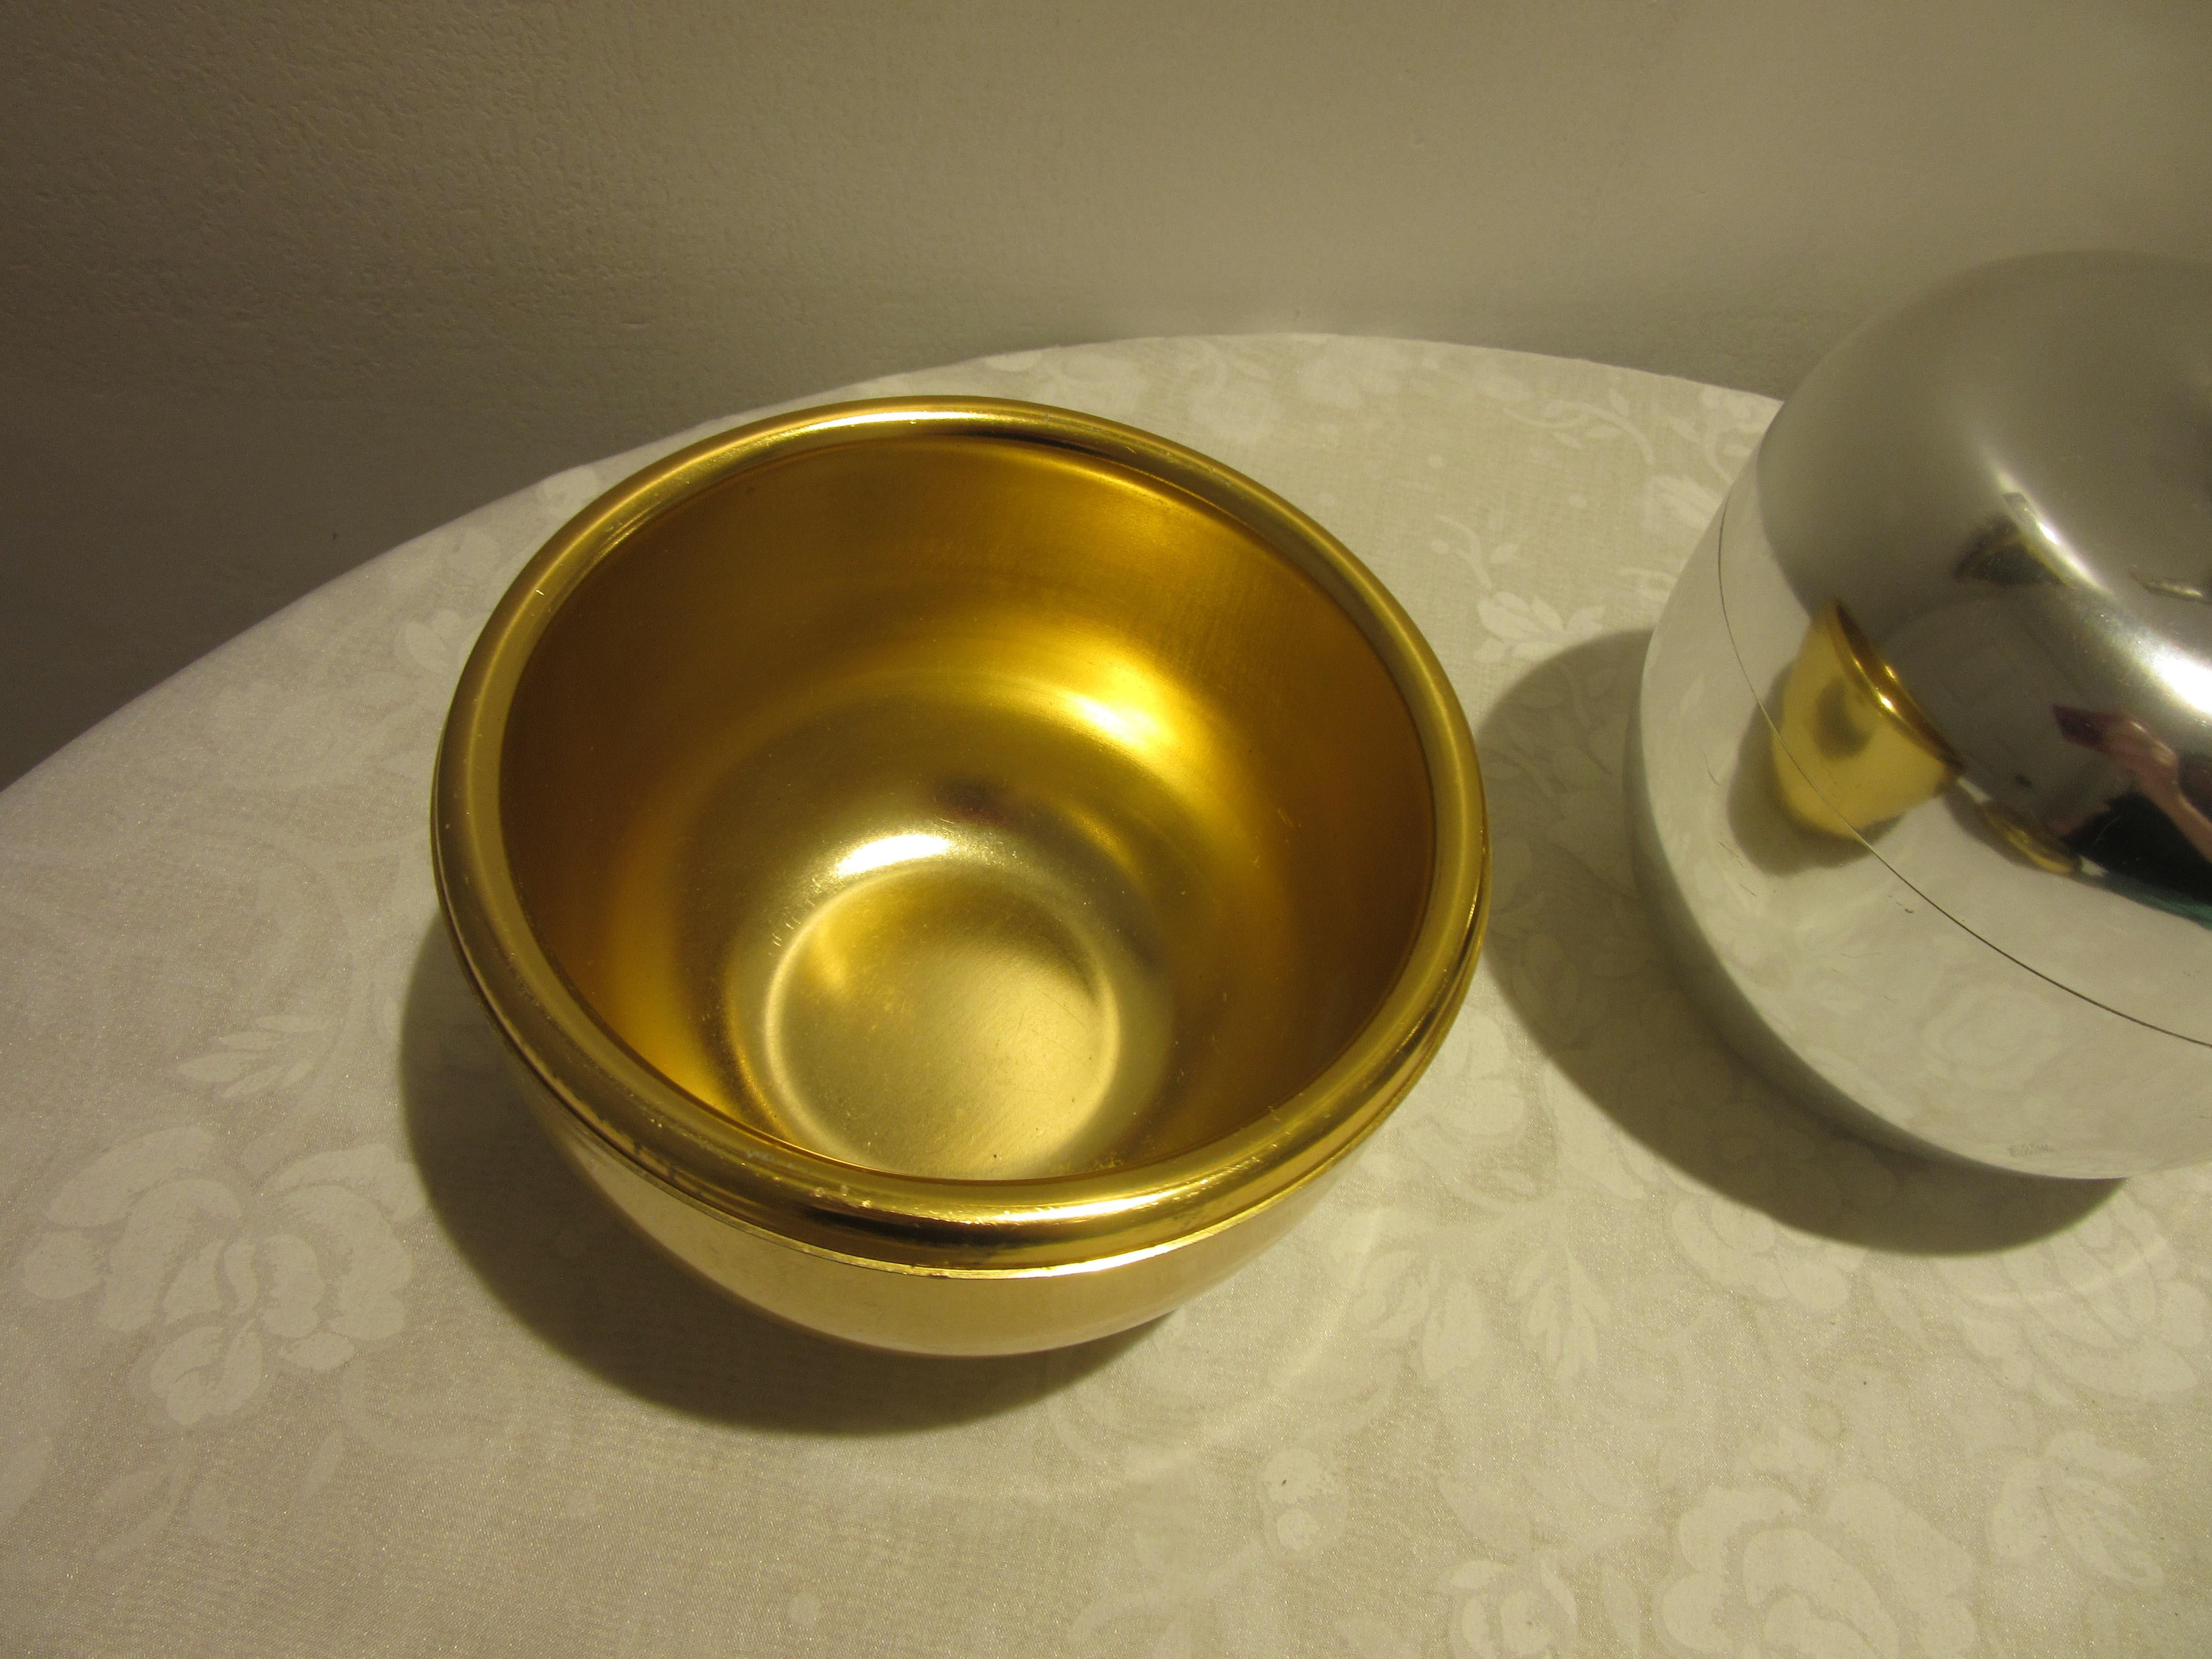 Italian Mid-Century Modern pair of aluminum ice buckets; one silver and the other gold, designed by Ettore Sottsass for Rinnovel. Both pieces are in the shape of an apple and are entitled “Mela”. The gold-tone bucket has the same color aluminum